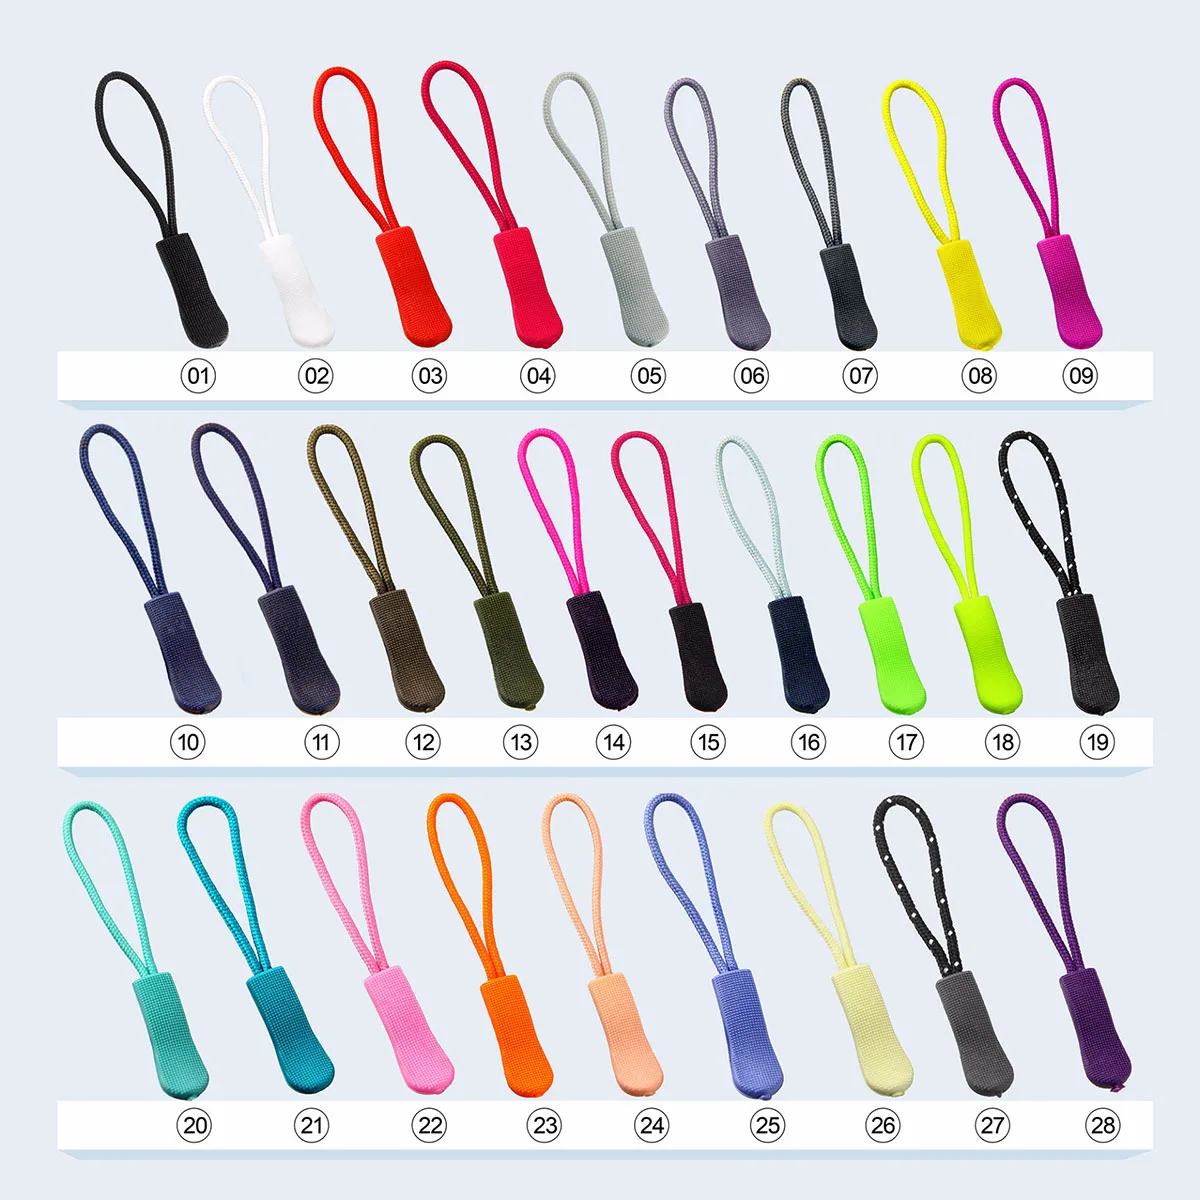 10pcs Colorful Zipper Pull Cord Zip Puller High-quality Replacement Ends Lock Zips Travel Bags Clip Buckle Sport Garment Parts